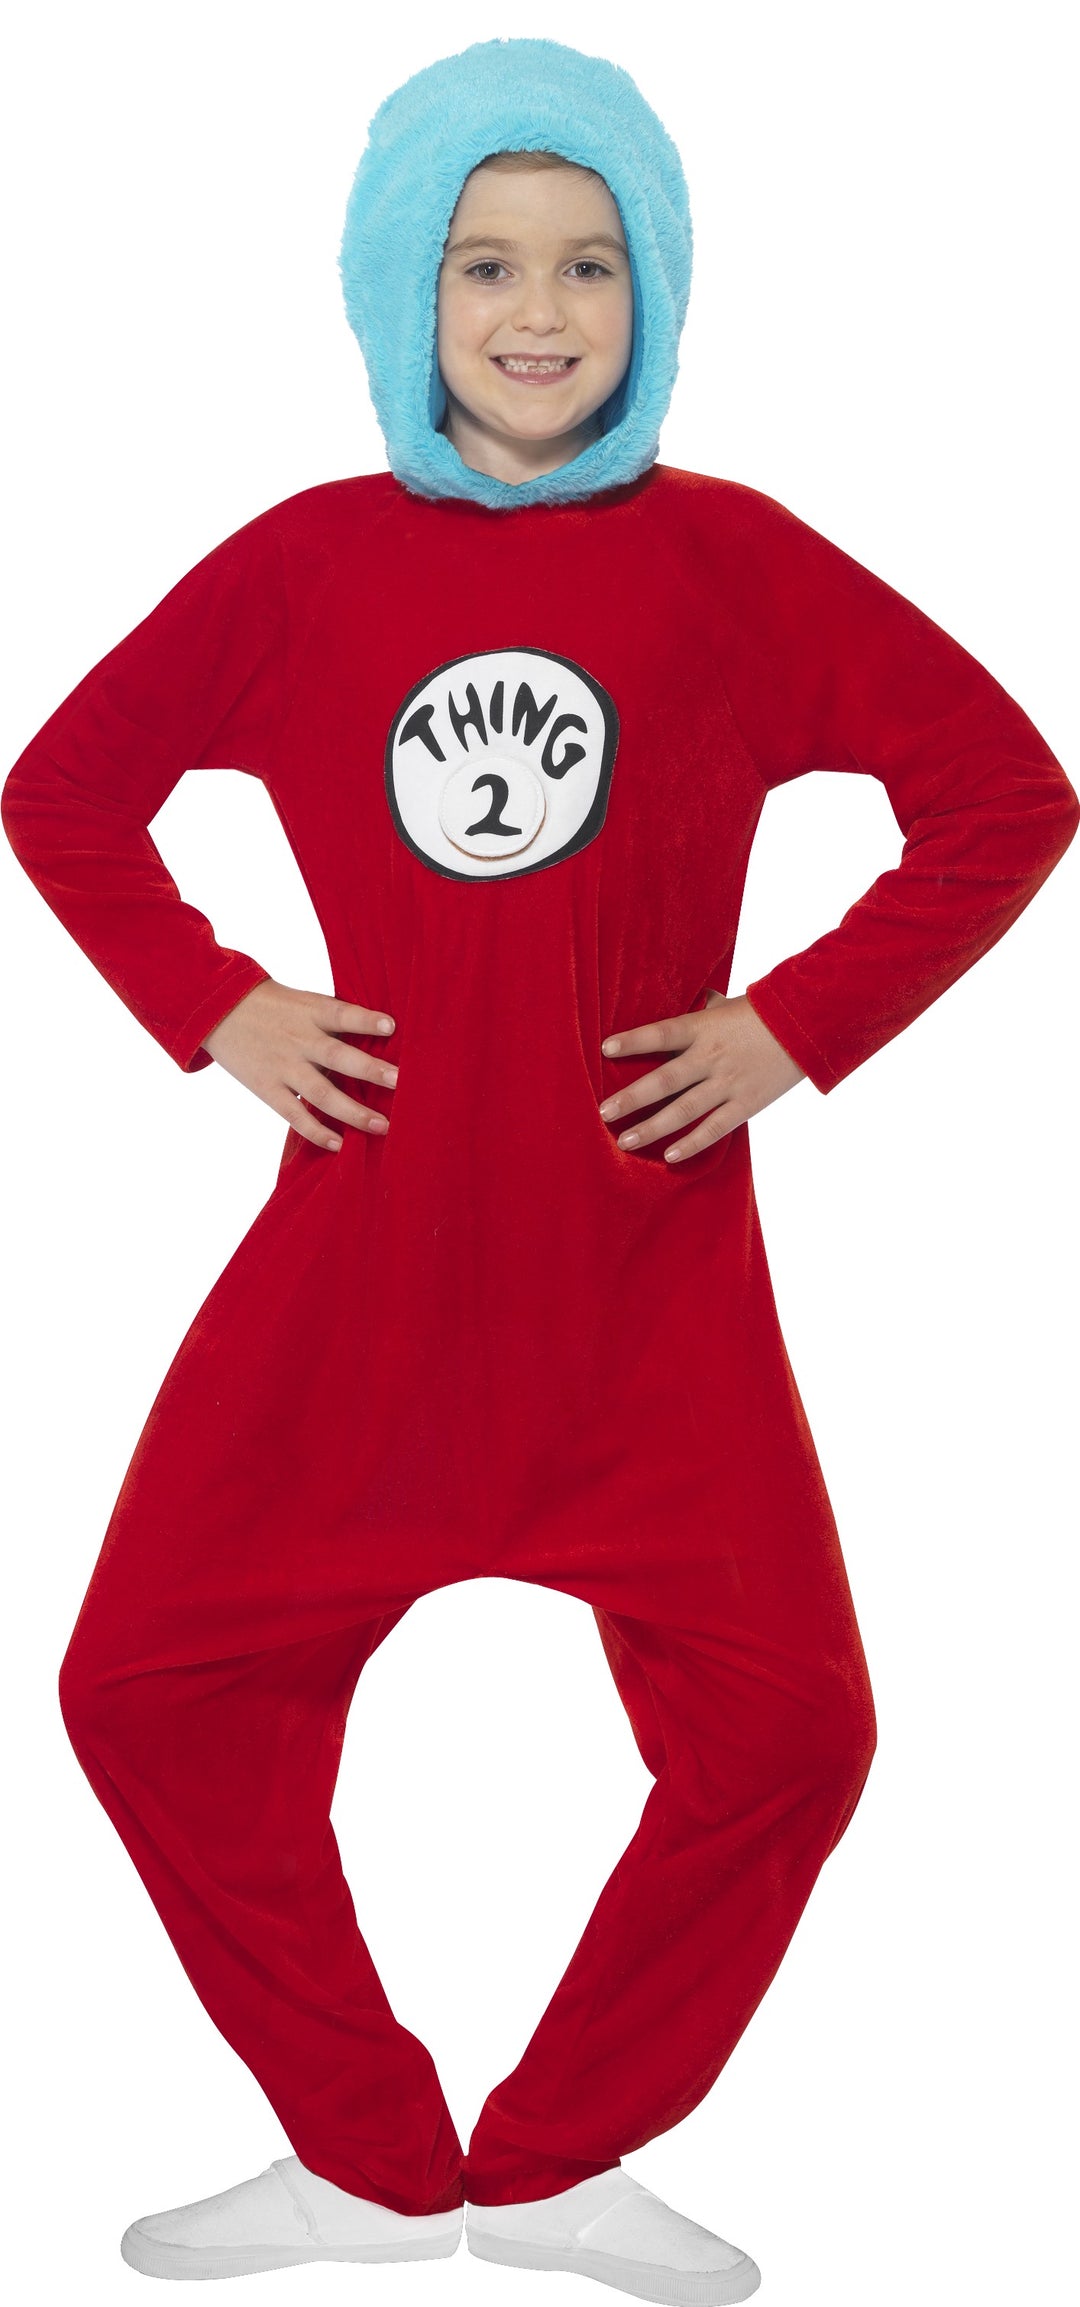 Boys' Thing 1 or Thing 2 Book Character Costume